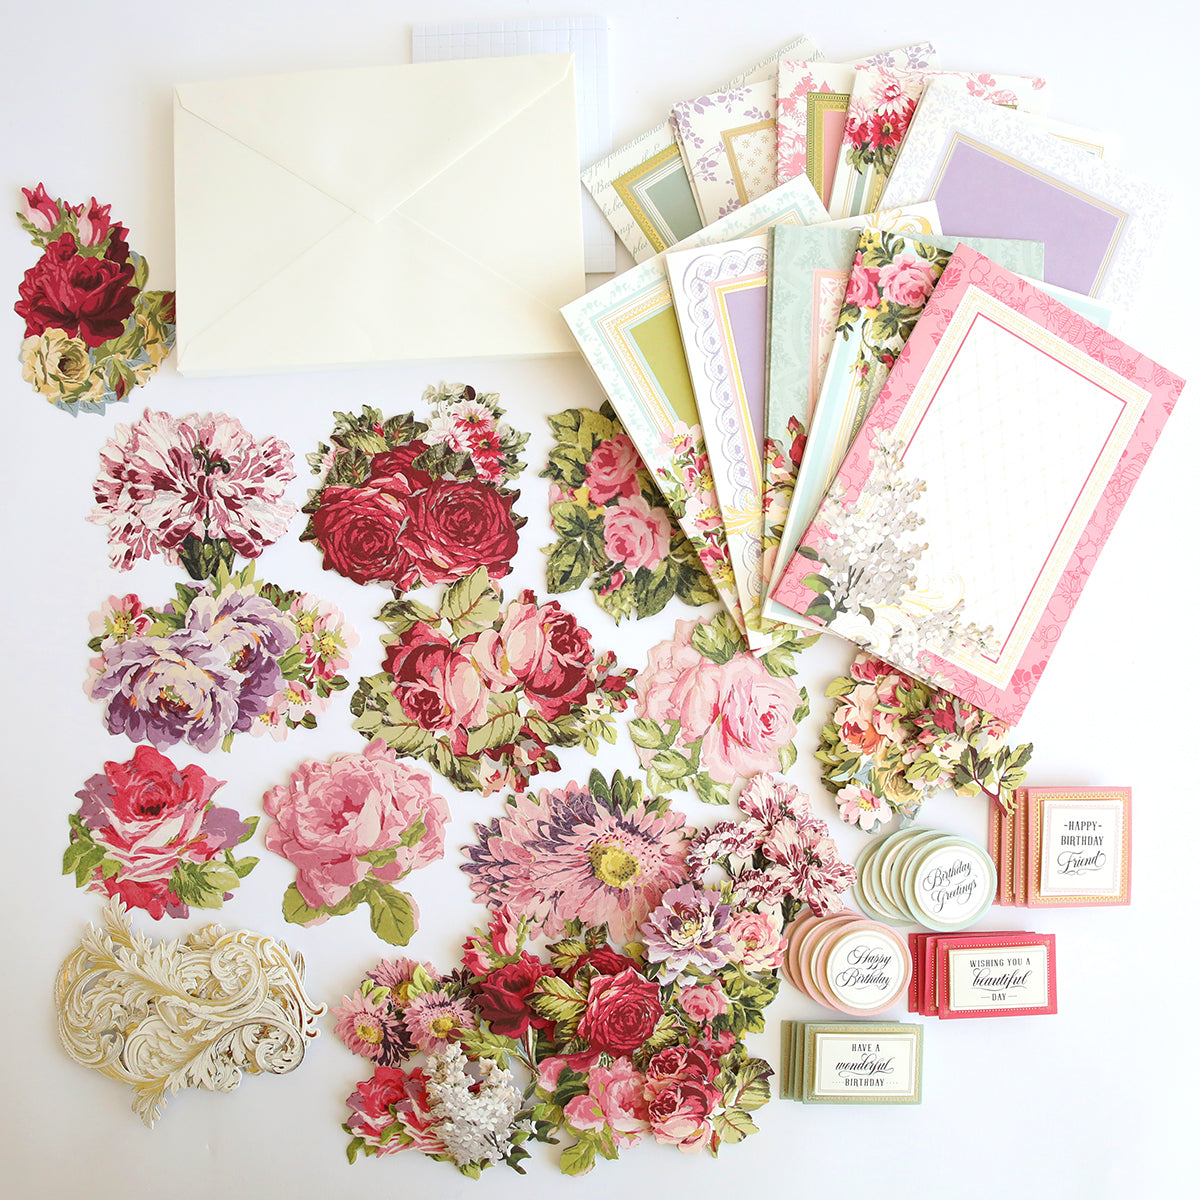 Folded Flower Birthday Card Kit, envelopes, and embellishments spread out on a white surface.